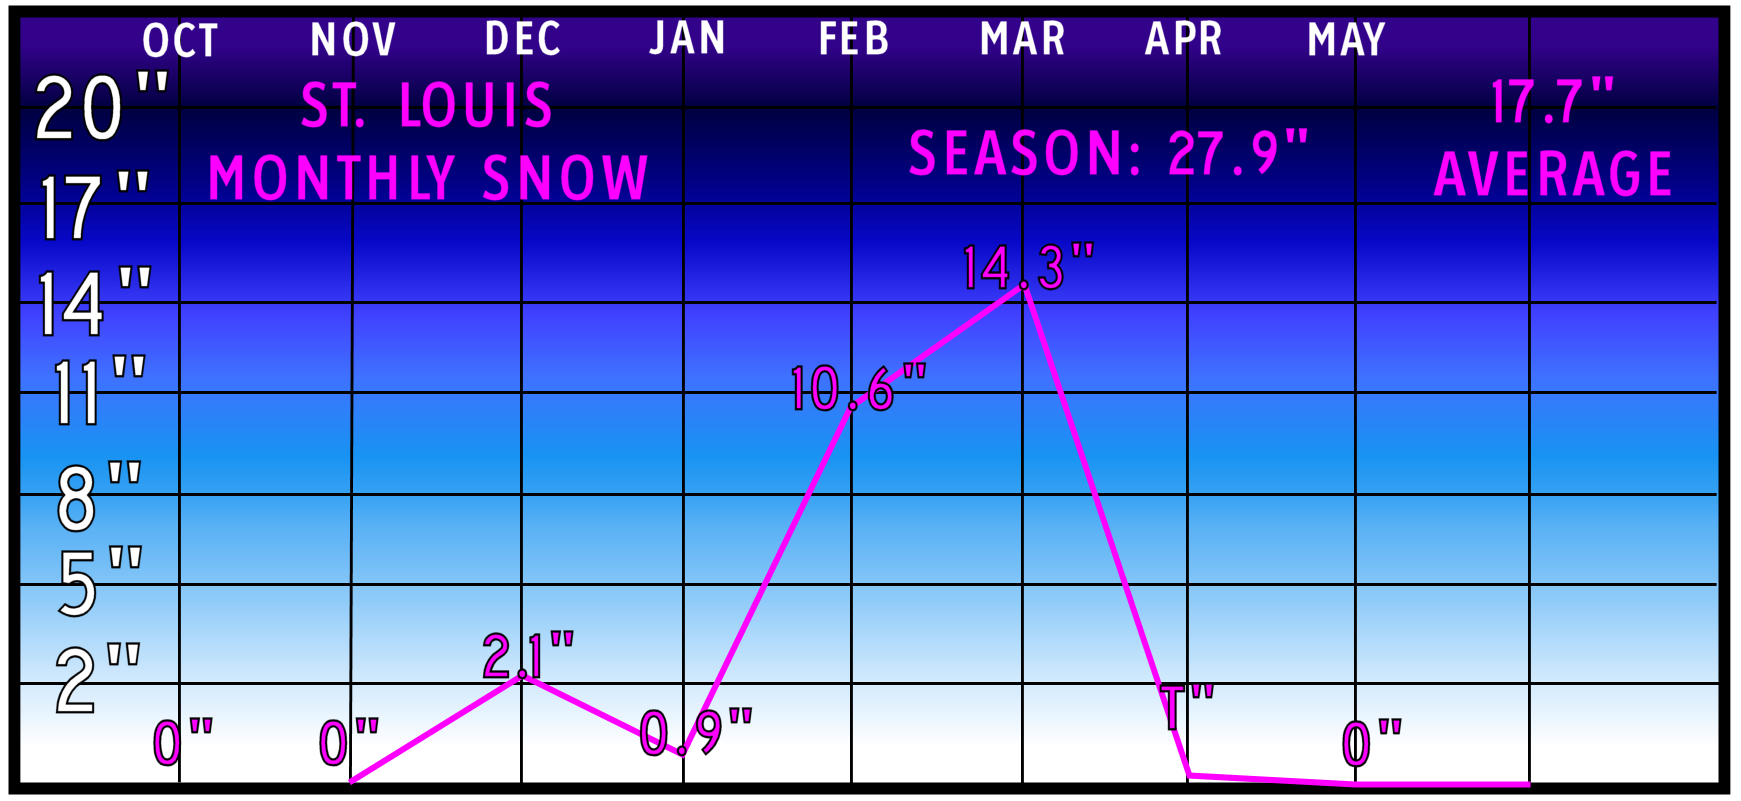 The Winter of 2012-2013: The winter that almost wasn’t | Missouri/S Illinois Weather Center Blog